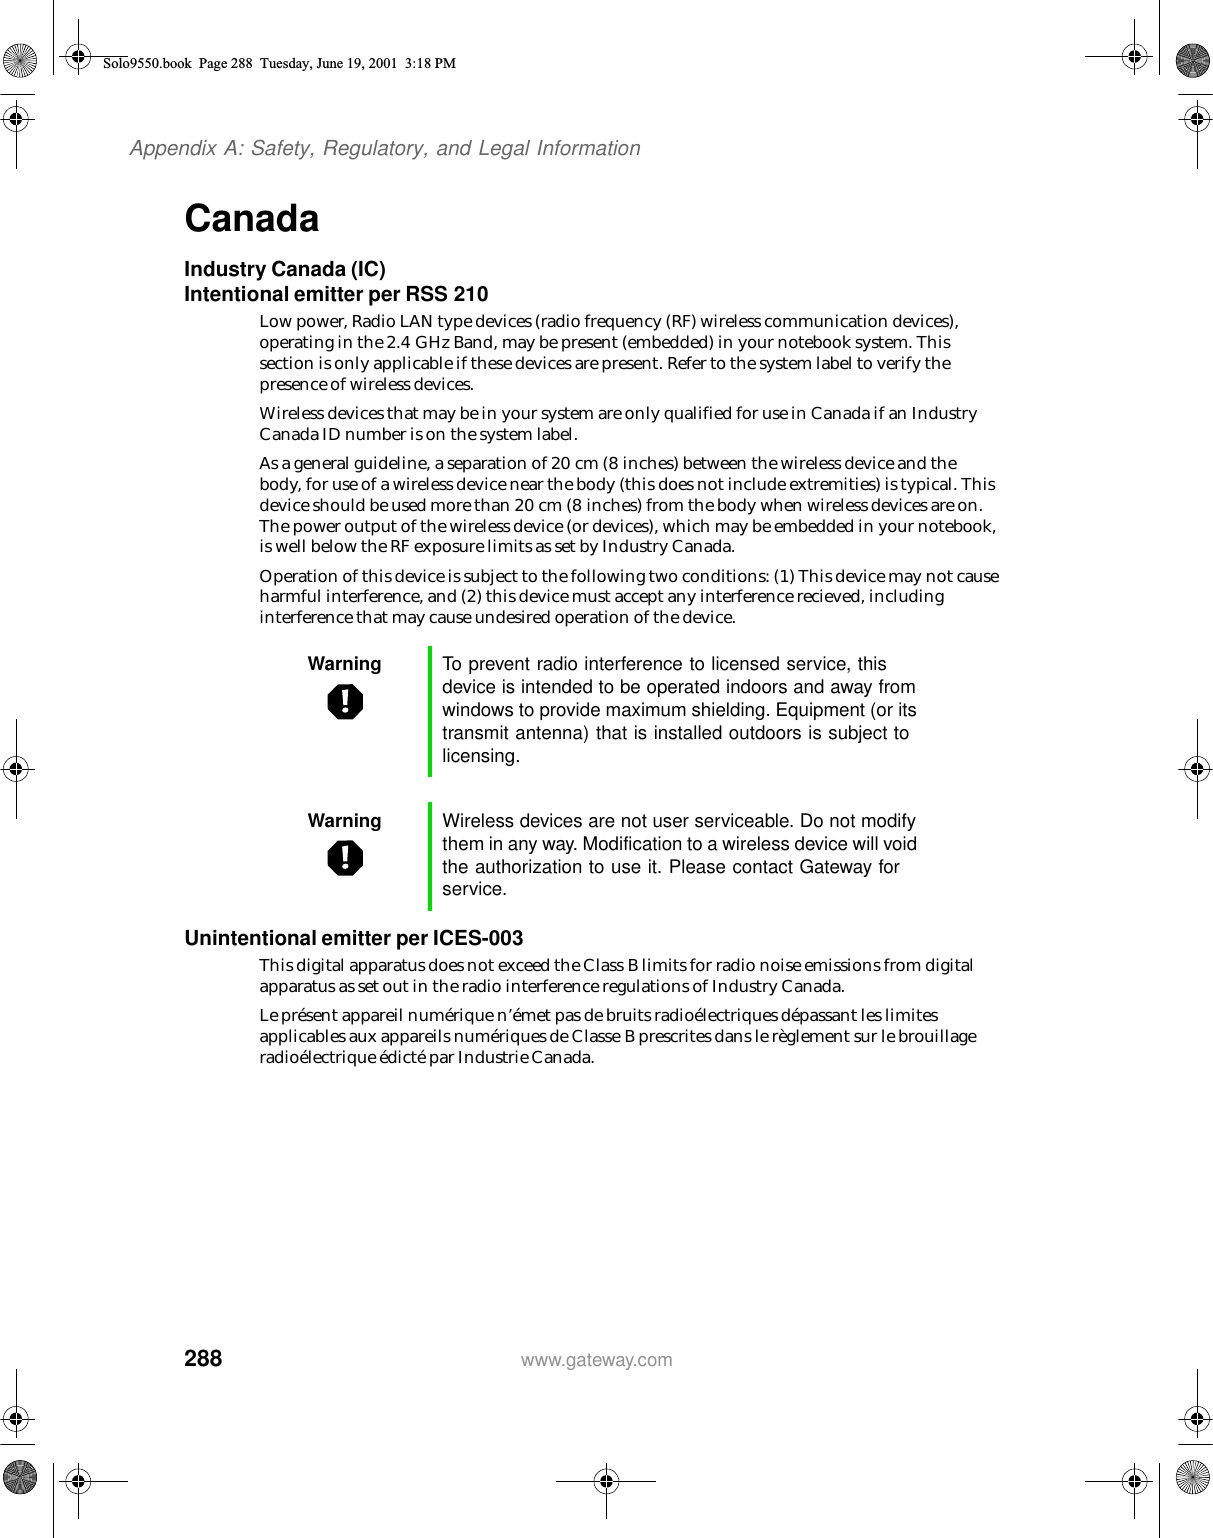 288Appendix A: Safety, Regulatory, and Legal Informationwww.gateway.comCanadaIndustry Canada (IC)Intentional emitter per RSS 210Low power, Radio LAN type devices (radio frequency (RF) wireless communication devices), operating in the 2.4 GHz Band, may be present (embedded) in your notebook system. This section is only applicable if these devices are present. Refer to the system label to verify the presence of wireless devices.Wireless devices that may be in your system are only qualified for use in Canada if an Industry Canada ID number is on the system label.As a general guideline, a separation of 20 cm (8 inches) between the wireless device and the body, for use of a wireless device near the body (this does not include extremities) is typical. This device should be used more than 20 cm (8 inches) from the body when wireless devices are on. The power output of the wireless device (or devices), which may be embedded in your notebook, is well below the RF exposure limits as set by Industry Canada. Operation of this device is subject to the following two conditions: (1) This device may not cause harmful interference, and (2) this device must accept any interference recieved, including interference that may cause undesired operation of the device.Unintentional emitter per ICES-003This digital apparatus does not exceed the Class B limits for radio noise emissions from digital apparatus as set out in the radio interference regulations of Industry Canada.Le présent appareil numérique n’émet pas de bruits radioélectriques dépassant les limites applicables aux appareils numériques de Classe B prescrites dans le règlement sur le brouillage radioélectrique édicté par Industrie Canada.Warning To prevent radio interference to licensed service, this device is intended to be operated indoors and away from windows to provide maximum shielding. Equipment (or its transmit antenna) that is installed outdoors is subject to licensing.Warning Wireless devices are not user serviceable. Do not modify them in any way. Modification to a wireless device will void the authorization to use it. Please contact Gateway for service.Solo9550.book Page 288 Tuesday, June 19, 2001 3:18 PM